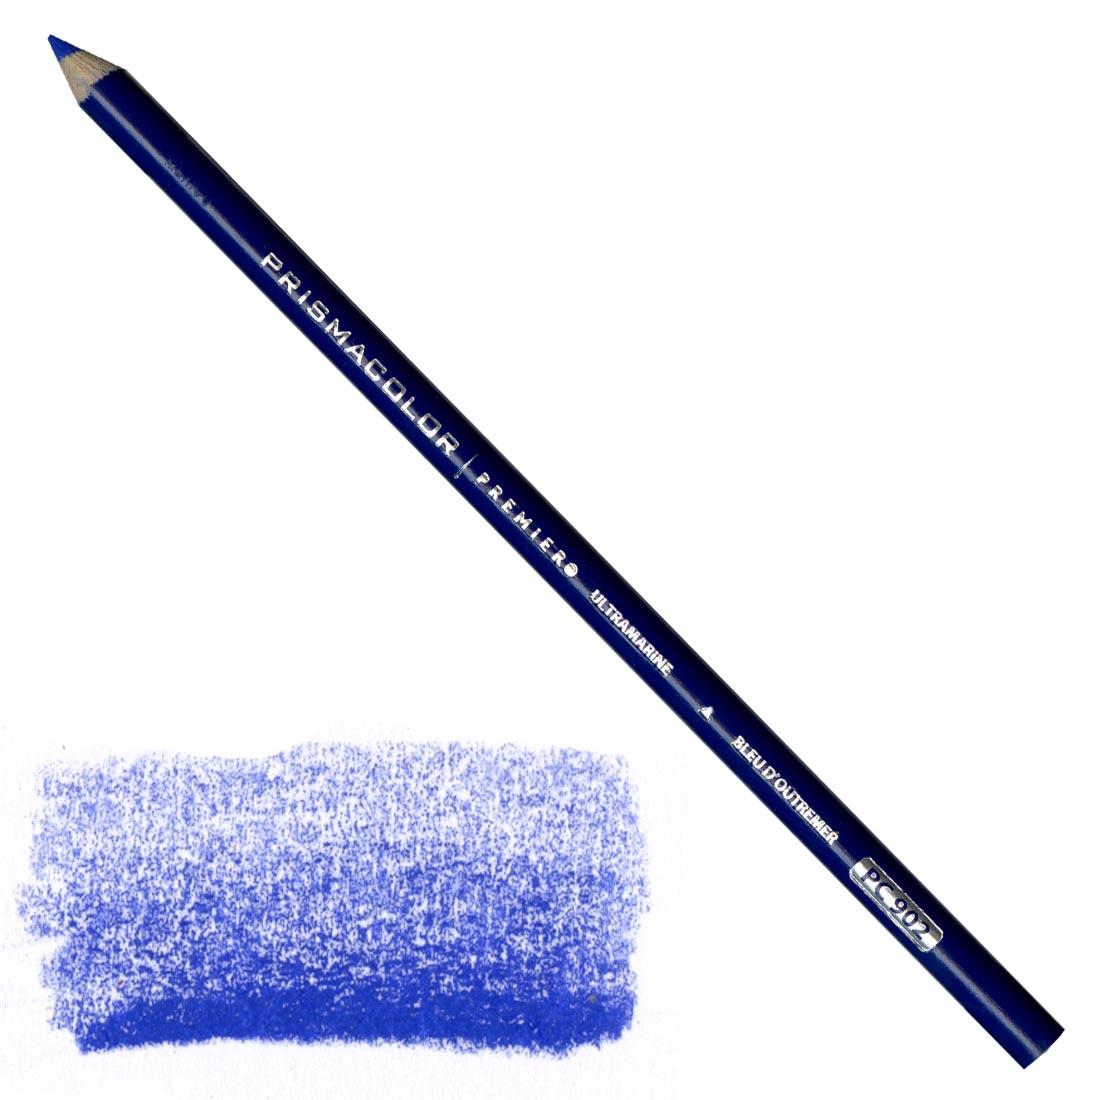 Ultramarine Prismacolor Premier Colored Pencil with a sample colored swatch